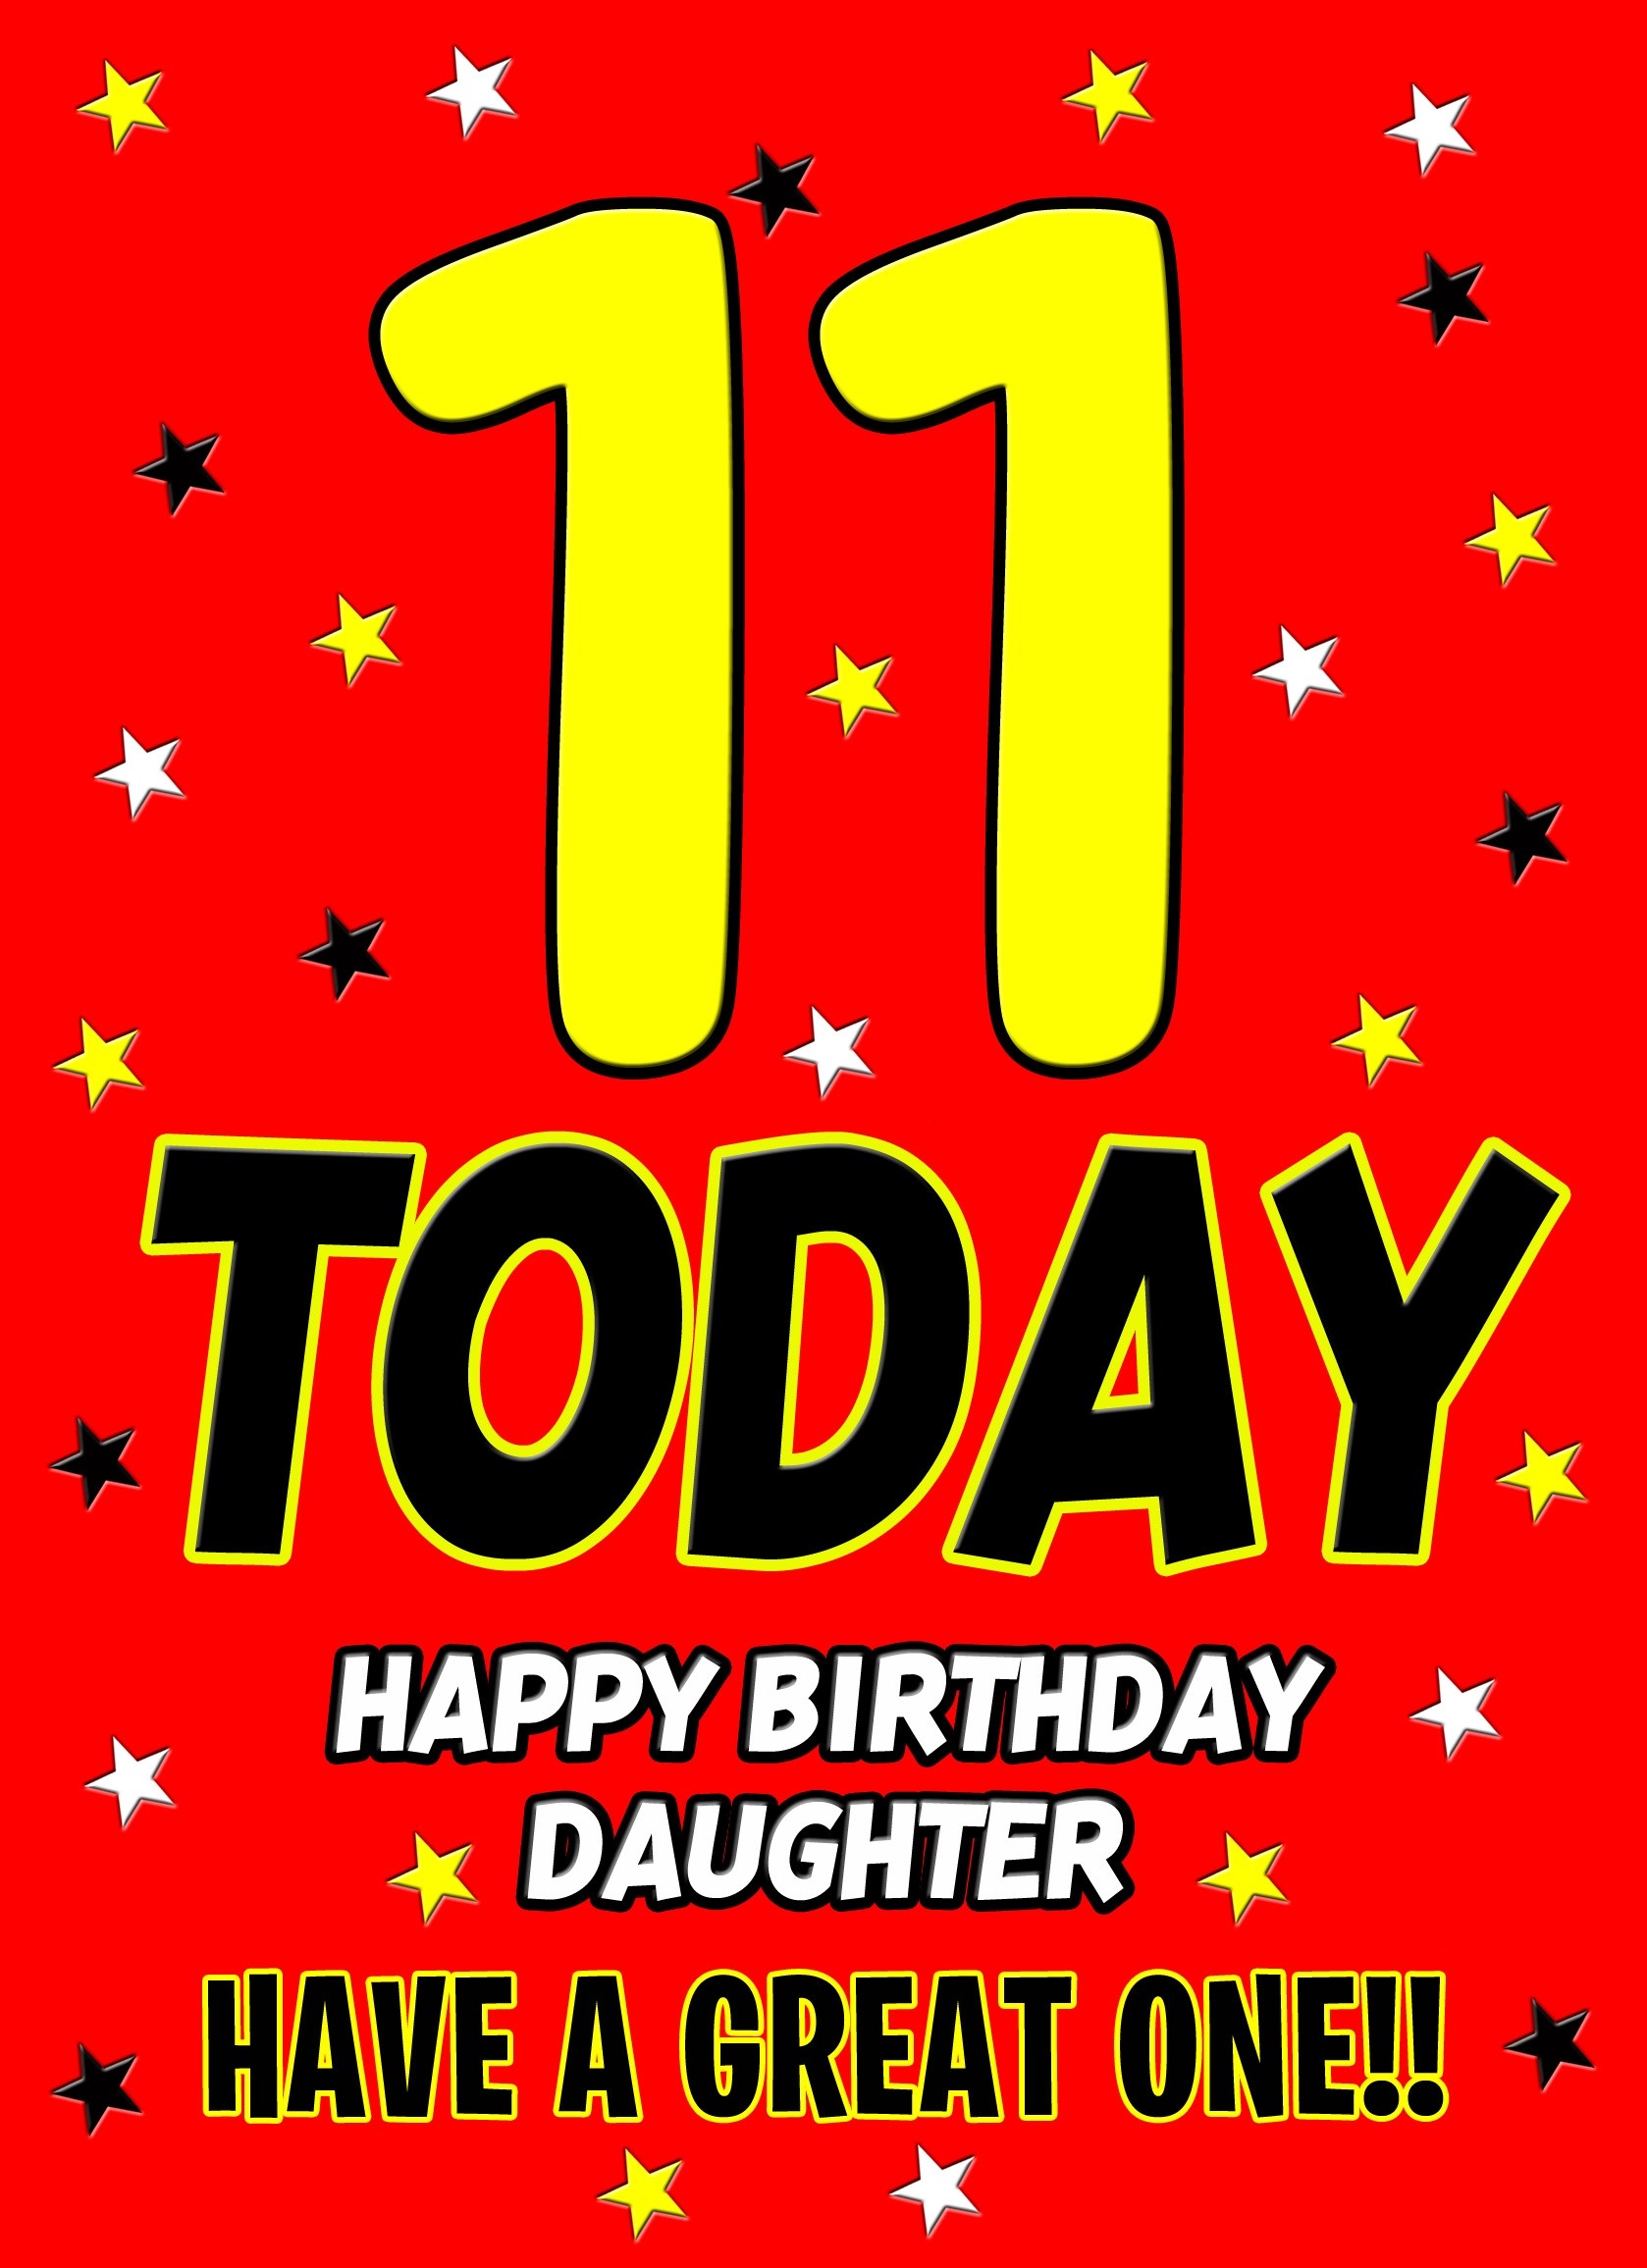 11 Today Birthday Card (Daughter)